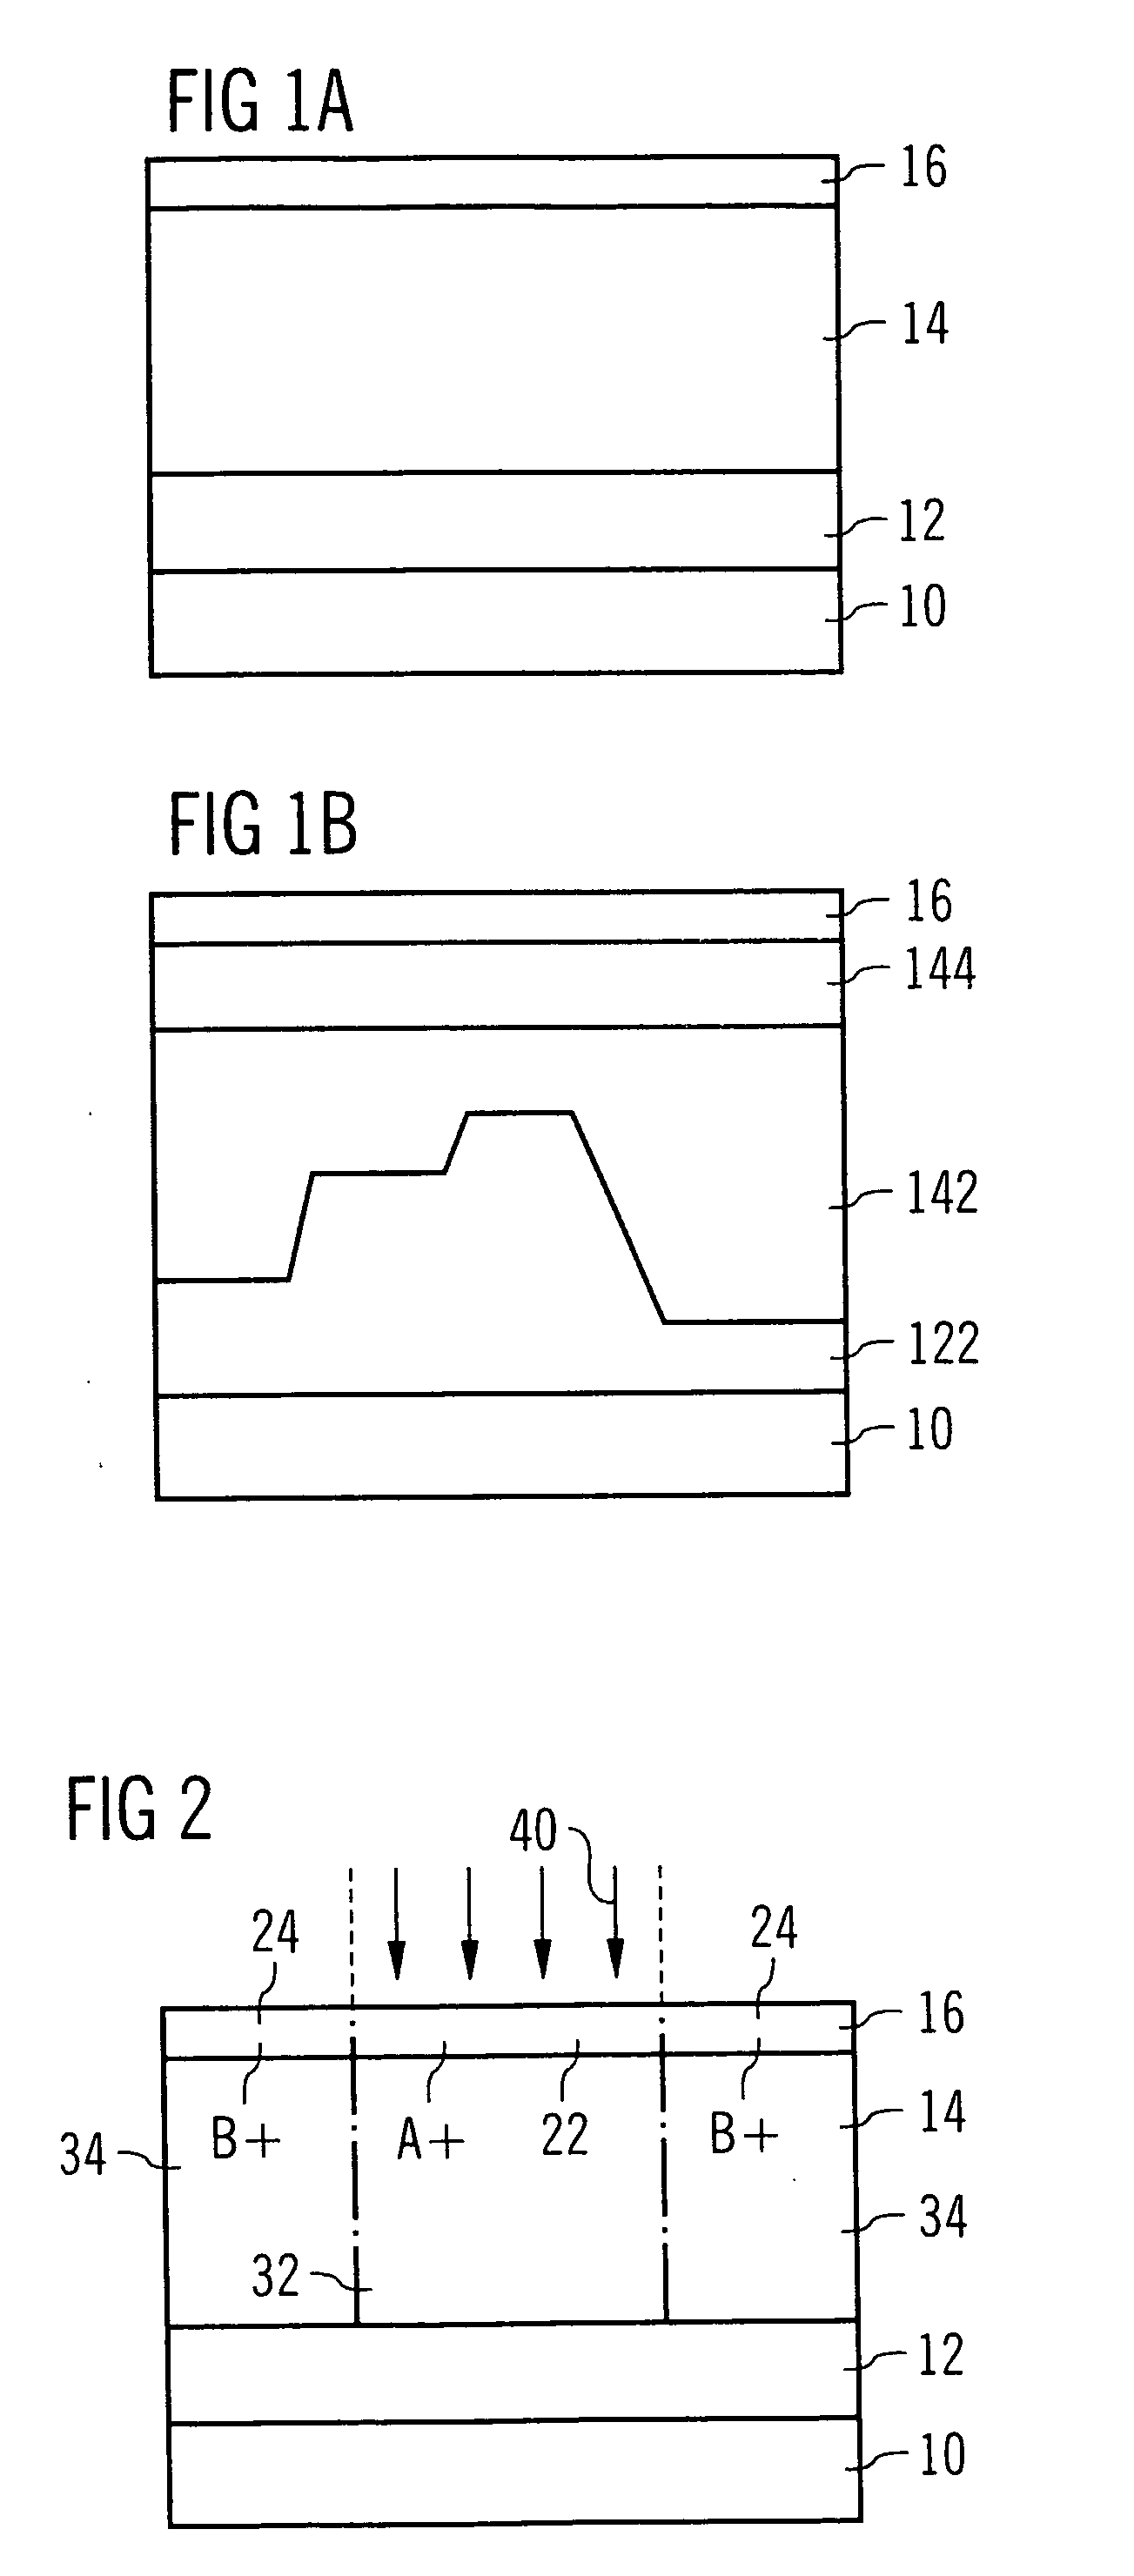 Photosensitive coating for enhancing a contrast of a photolithographic exposure